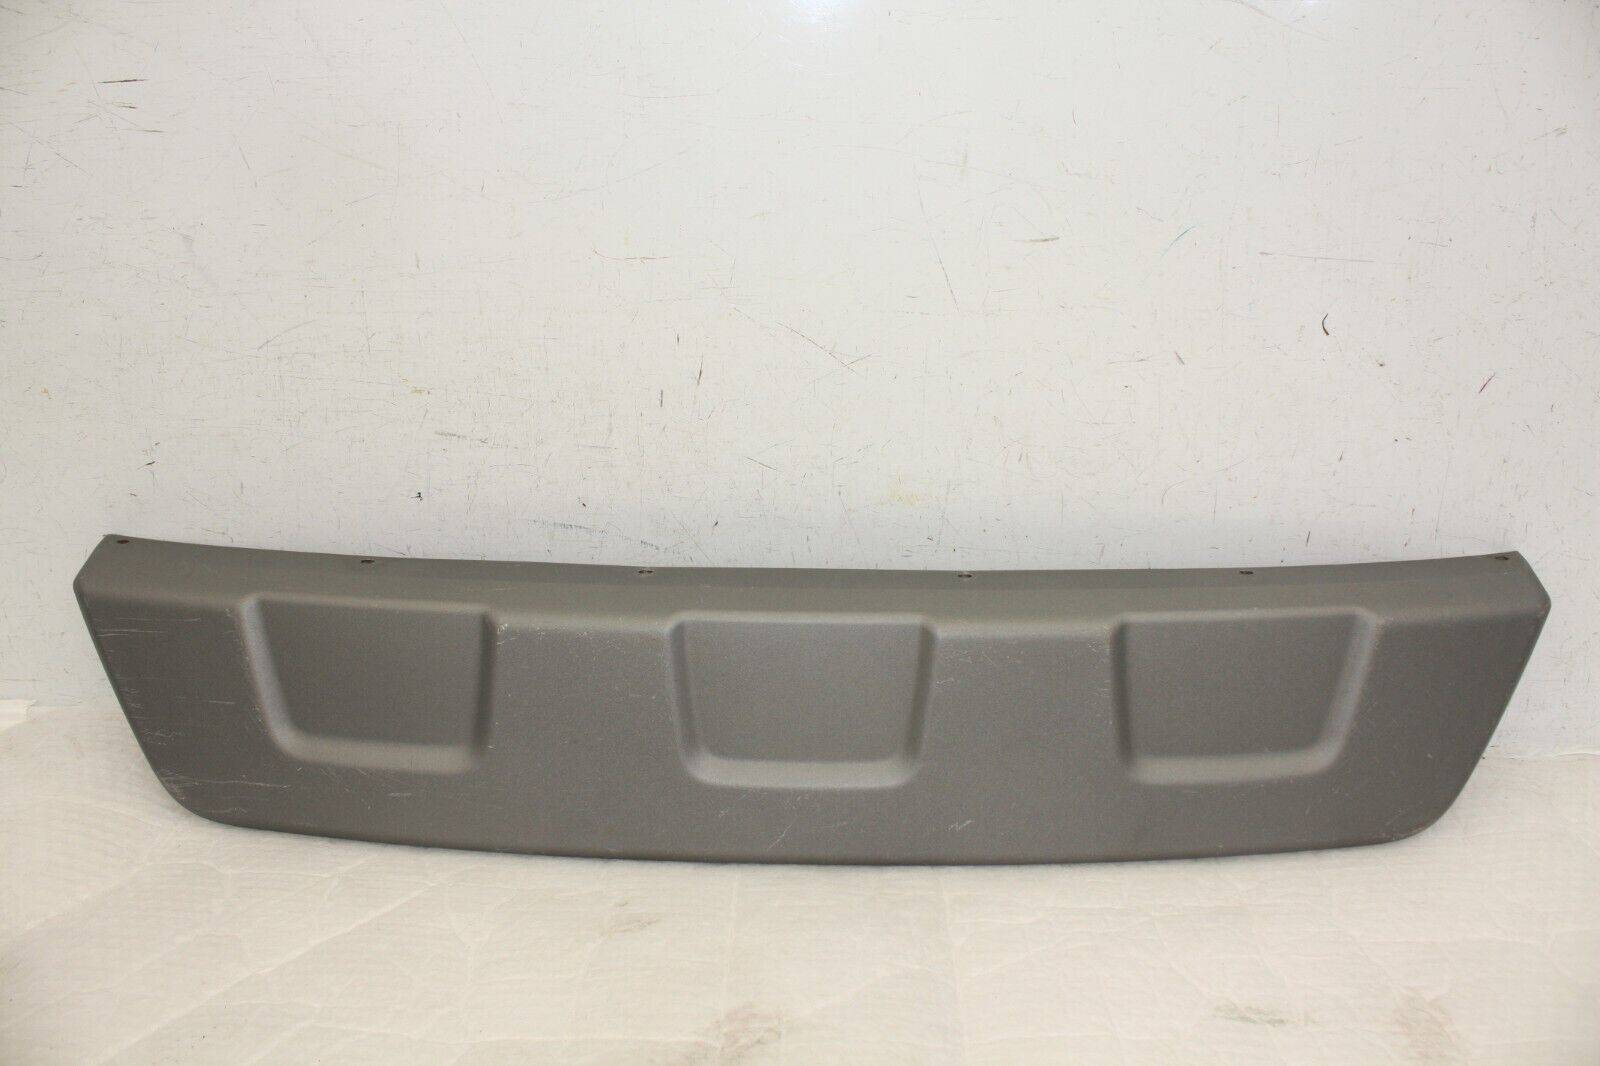 Ford EcoSport Rear Bumper Lower Section GN15 17D781 G Genuine 176336947413